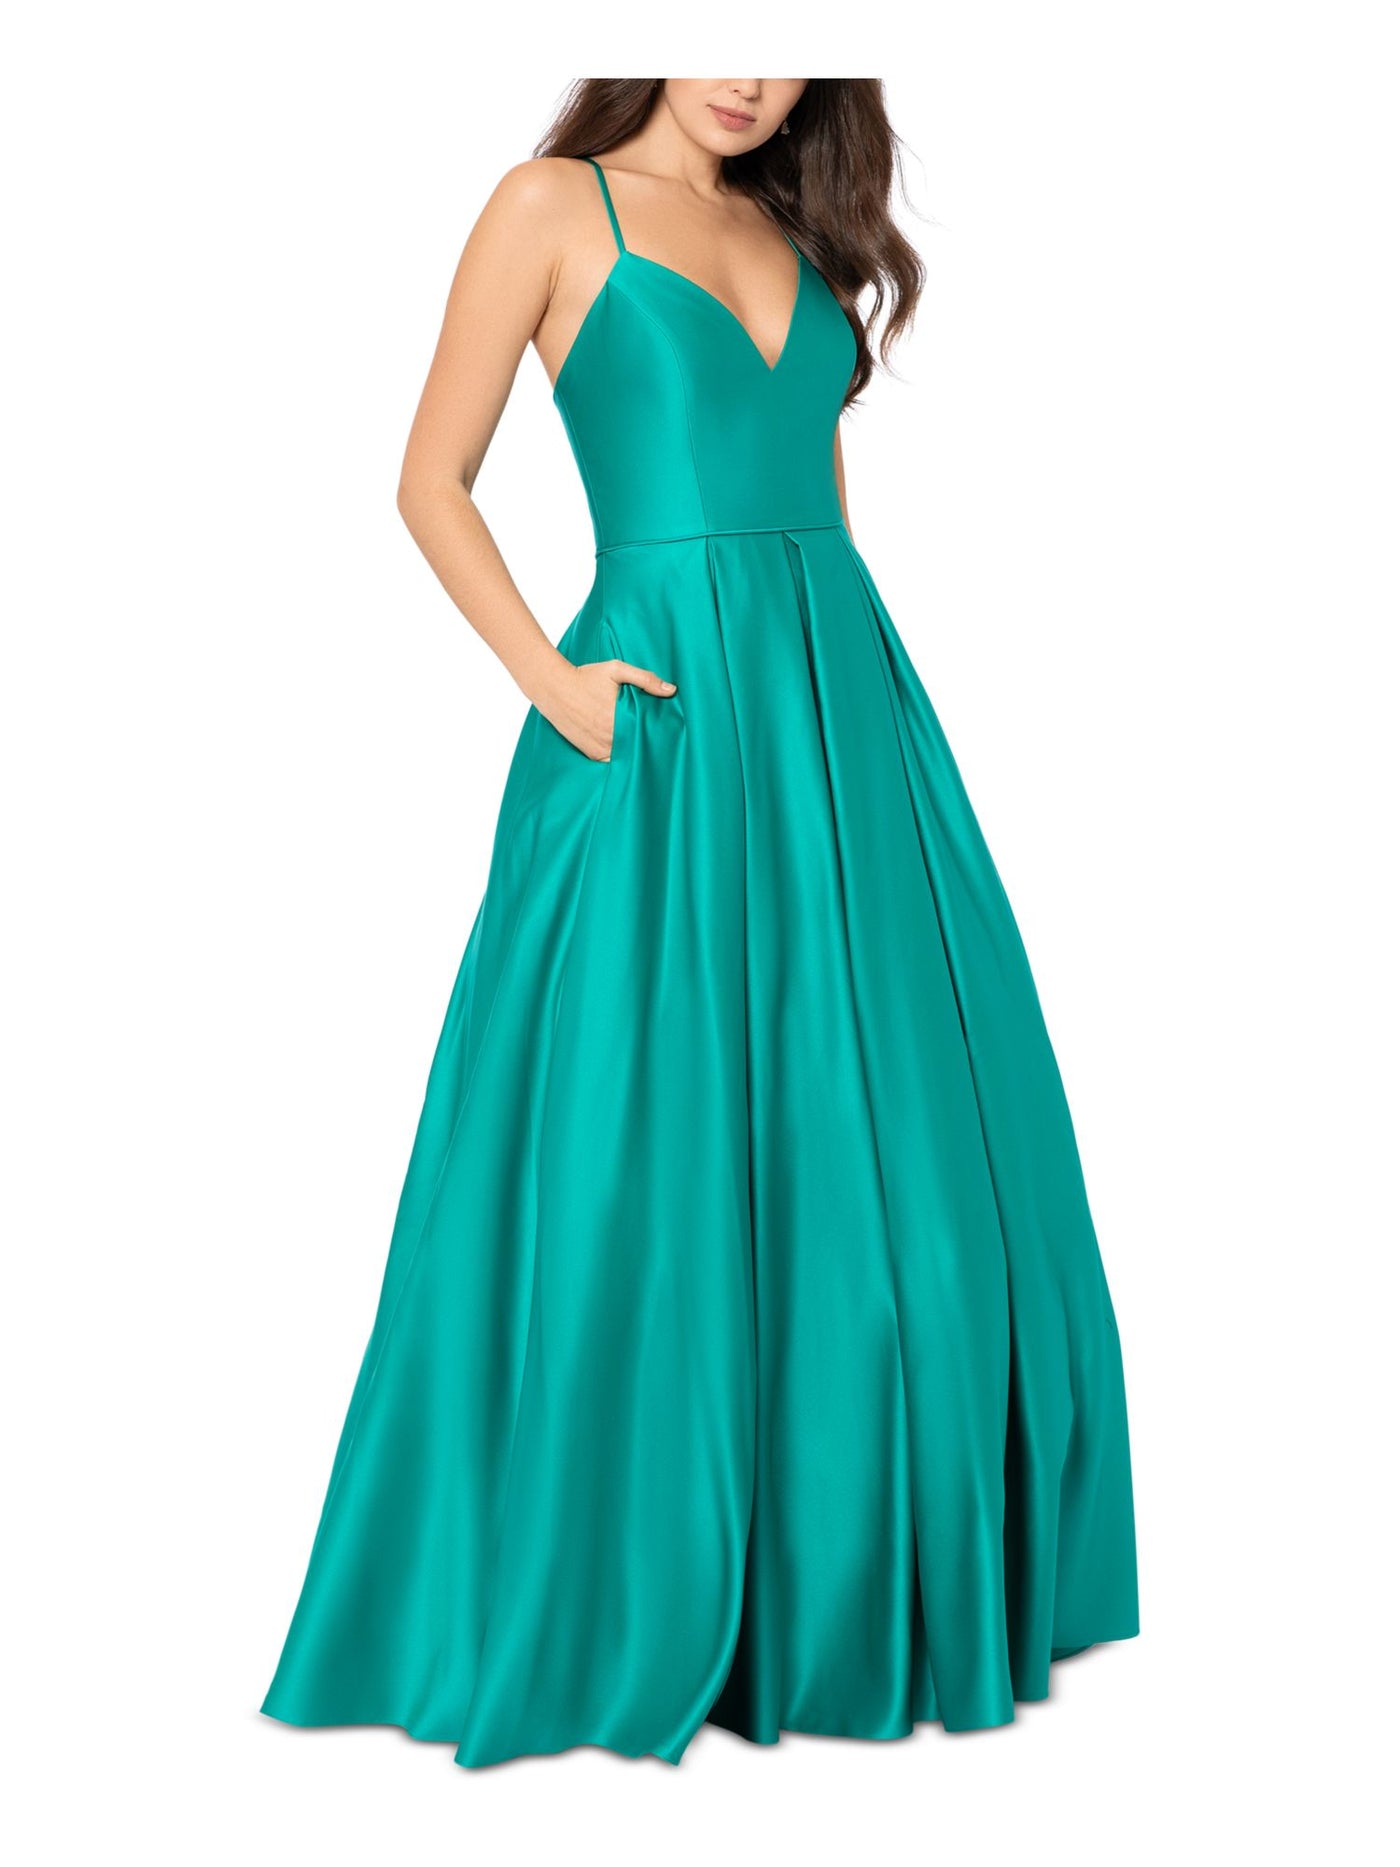 BLONDIE NITES Womens Teal Zippered Pleated Lace-up Back Pocketed Lined Spaghetti Strap V Neck Full-Length Prom Gown Dress Juniors 1